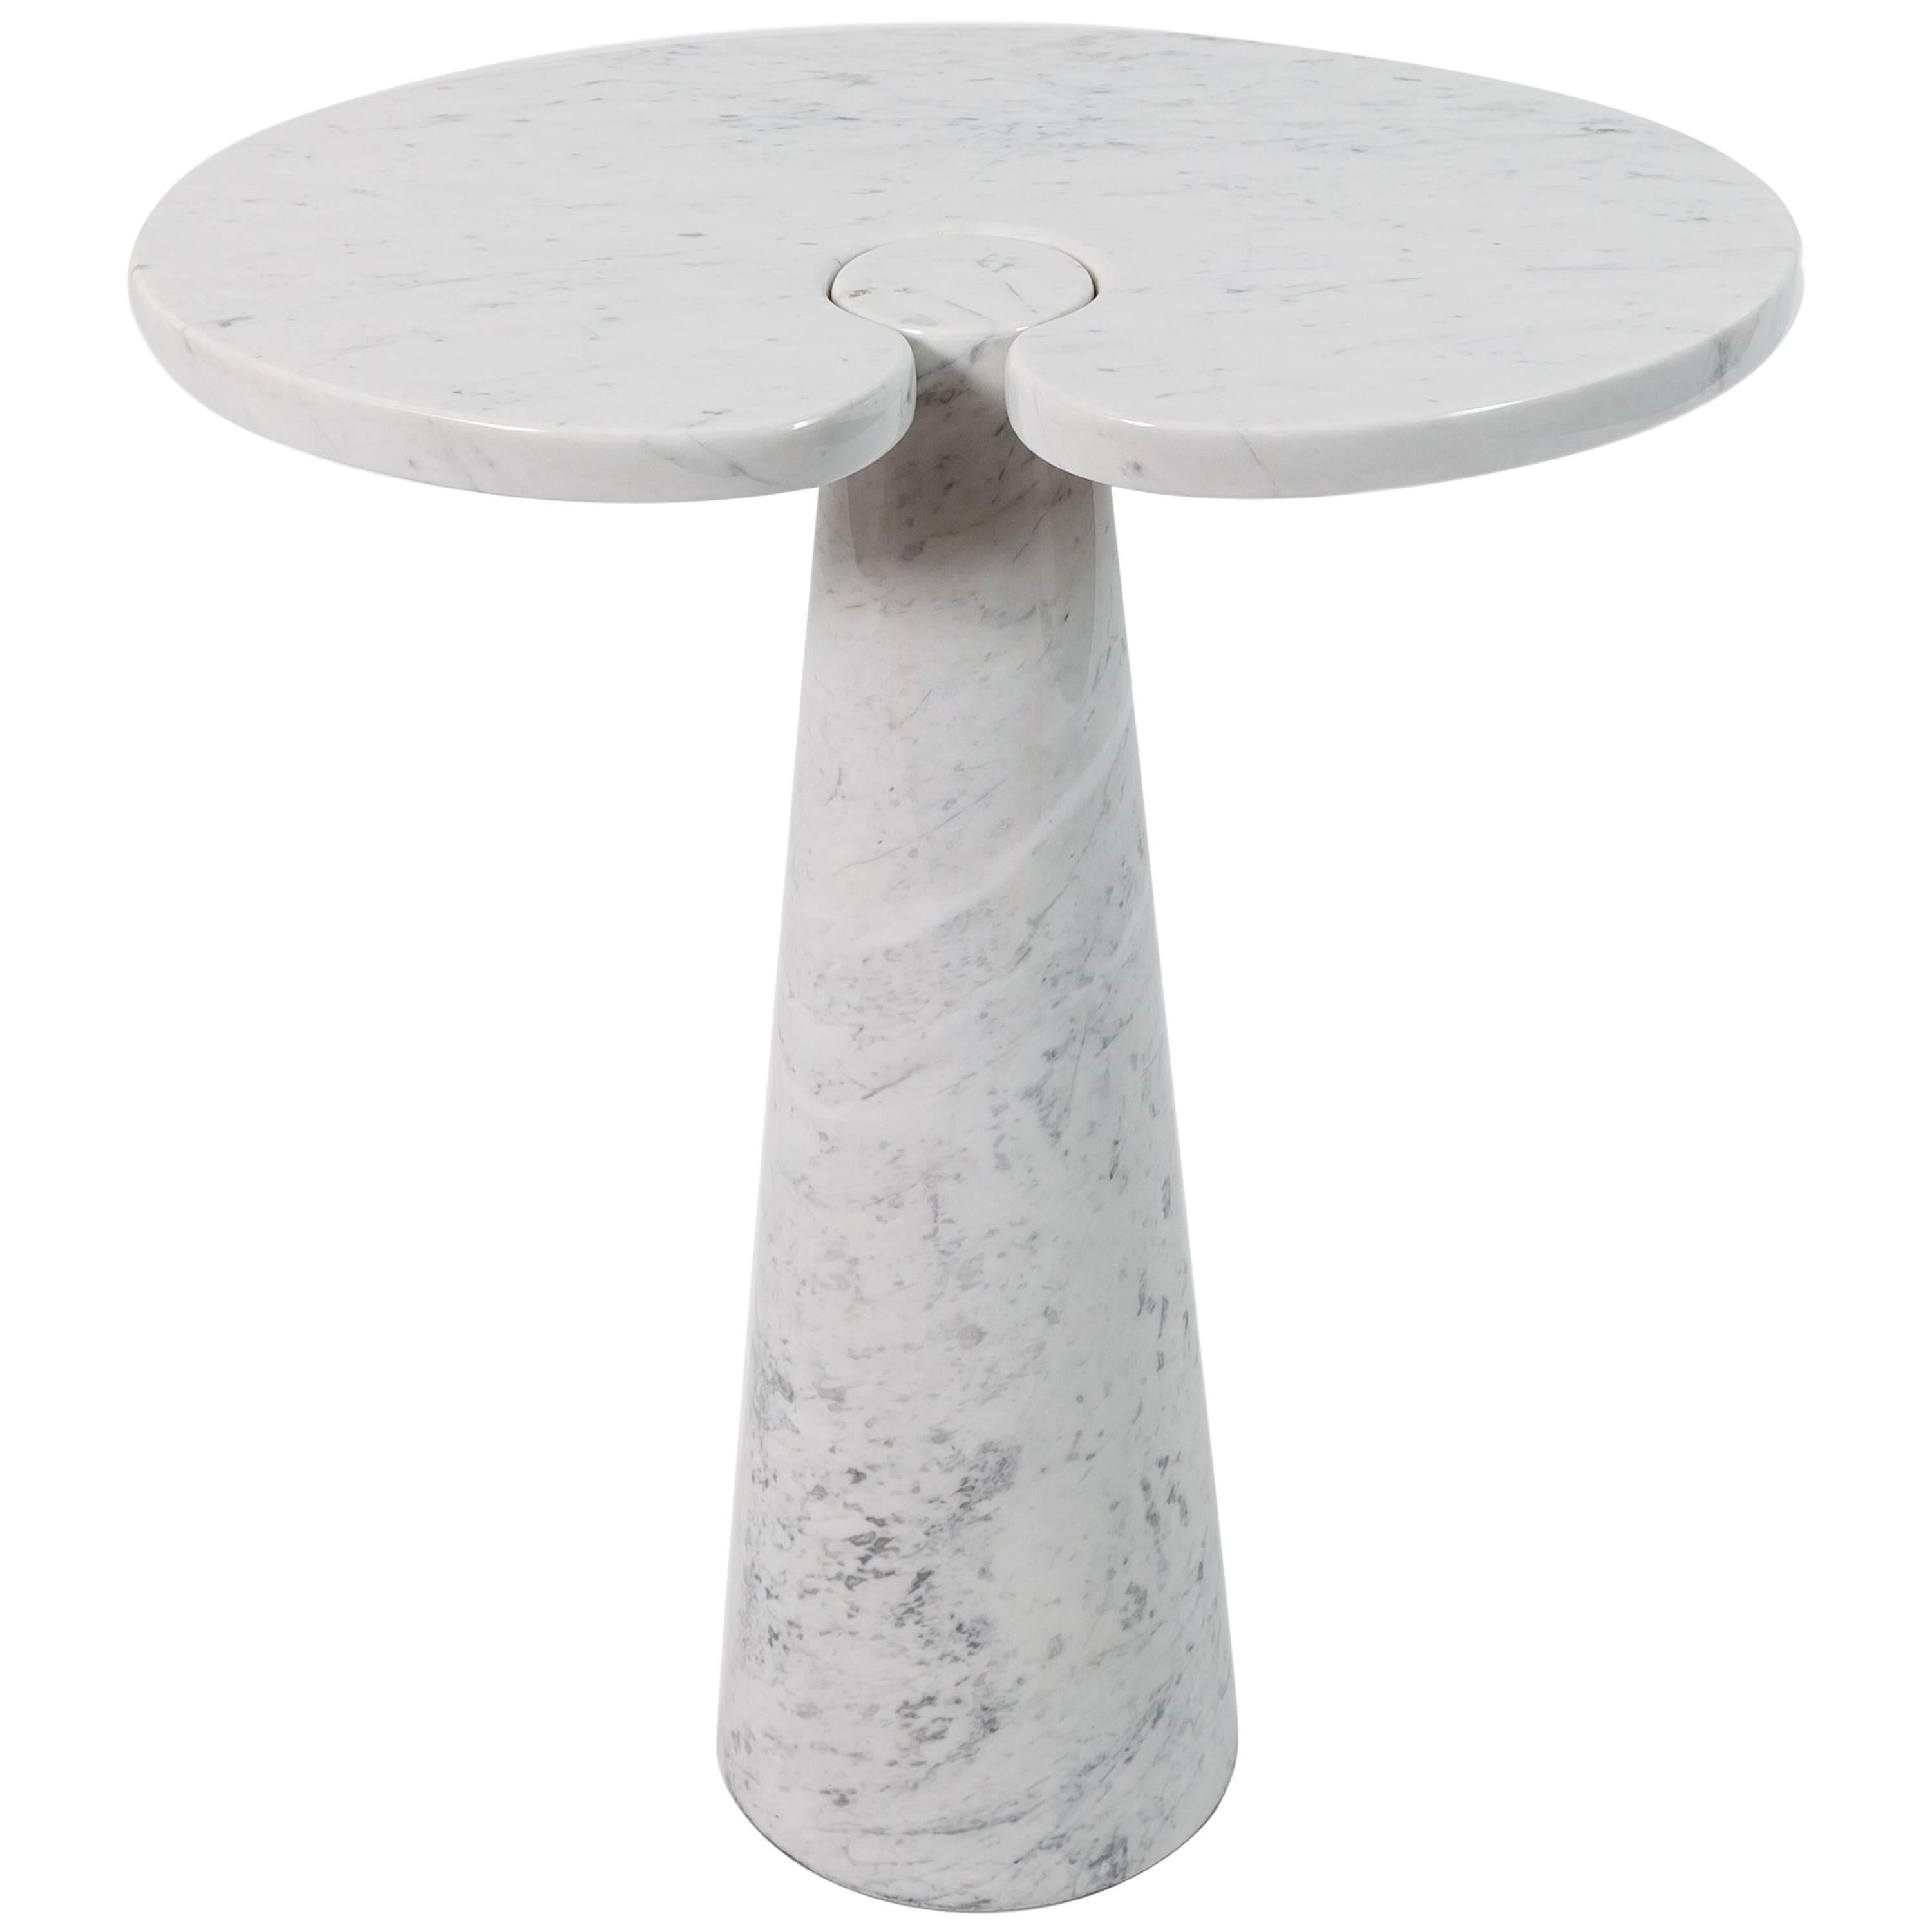 Angelo Mangiarotti Marble Tall Side Table or Gueridon from 'Eros' Series